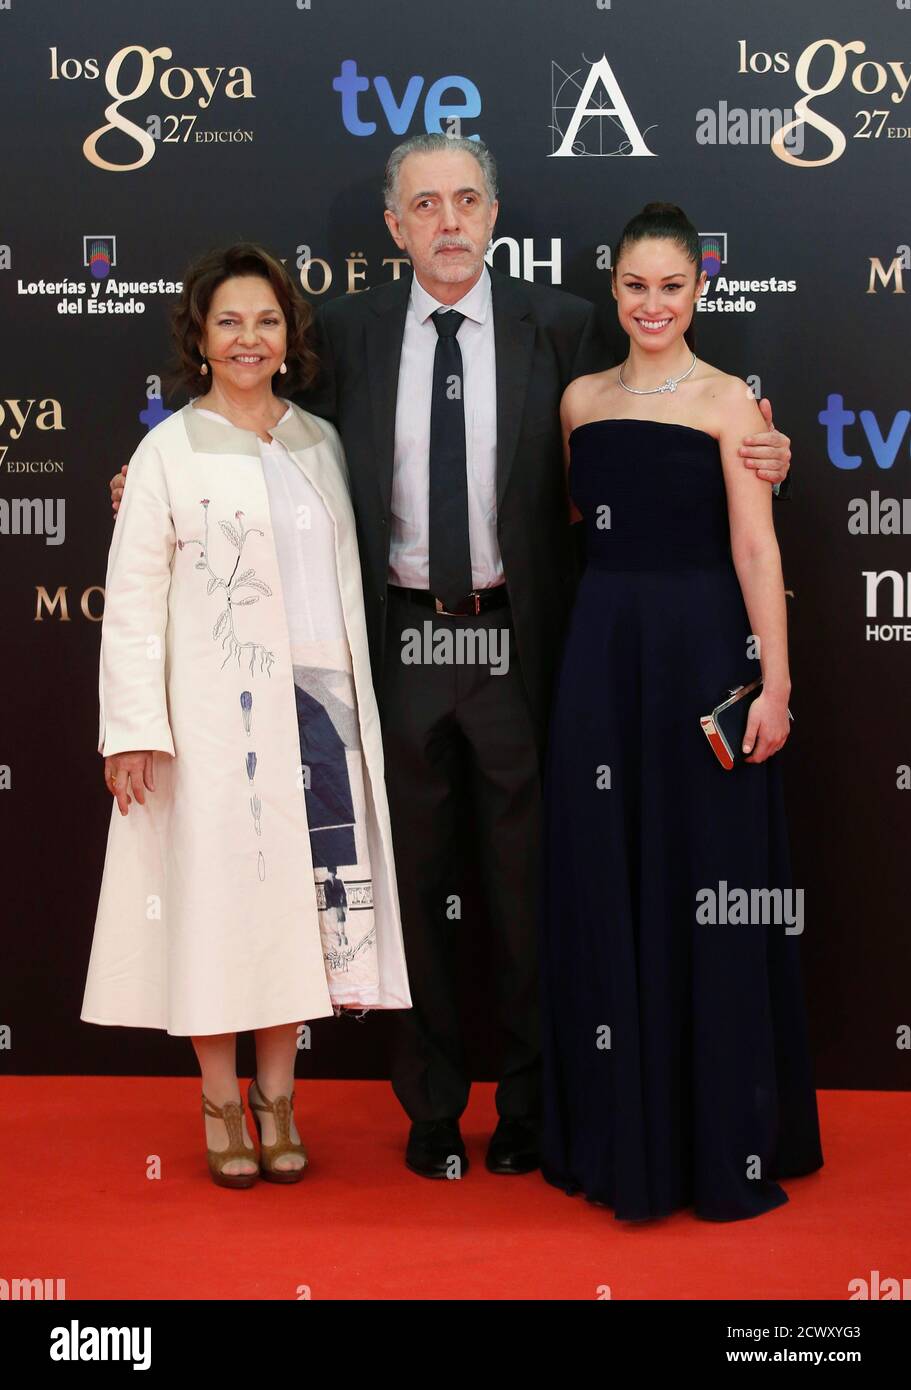 Spanish Director Fernando Trueba (C), nominated as best director, his wife Cristina Huete (L) and actress Aida Folch, nominated as best actress, pose on the red carpet before the Spanish Film Academy's Goya Awards ceremony in Madrid, February 17, 2013..     REUTERS/Sergio Perez (SPAIN - Tags: ENTERTAINMENT) Stock Photo